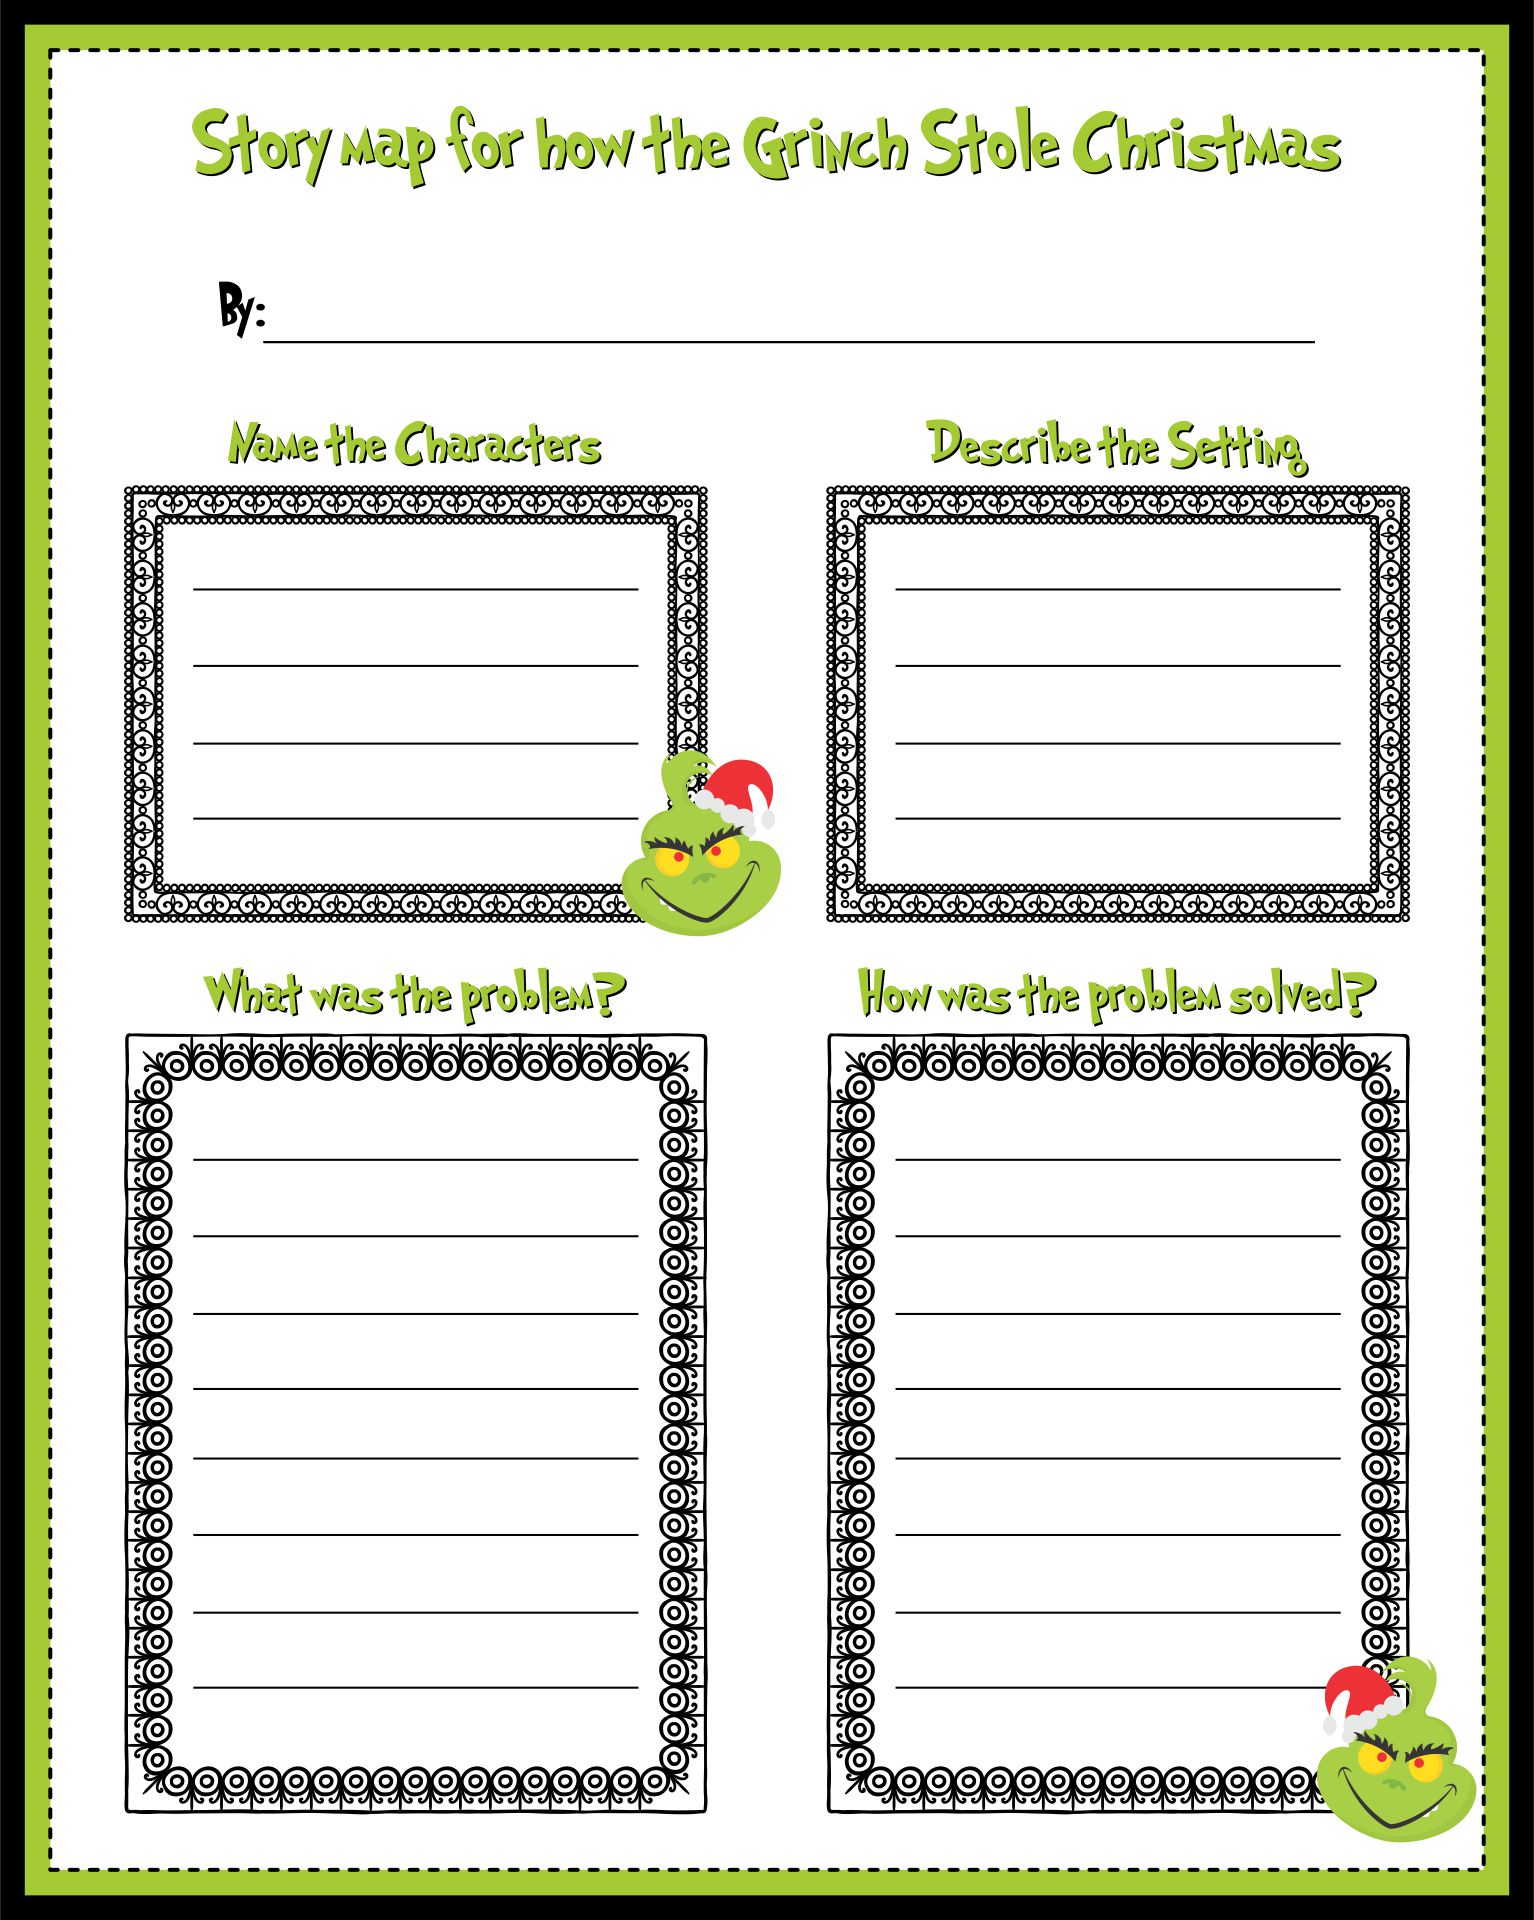 How the Grinch Stole Christmas Activity Pages